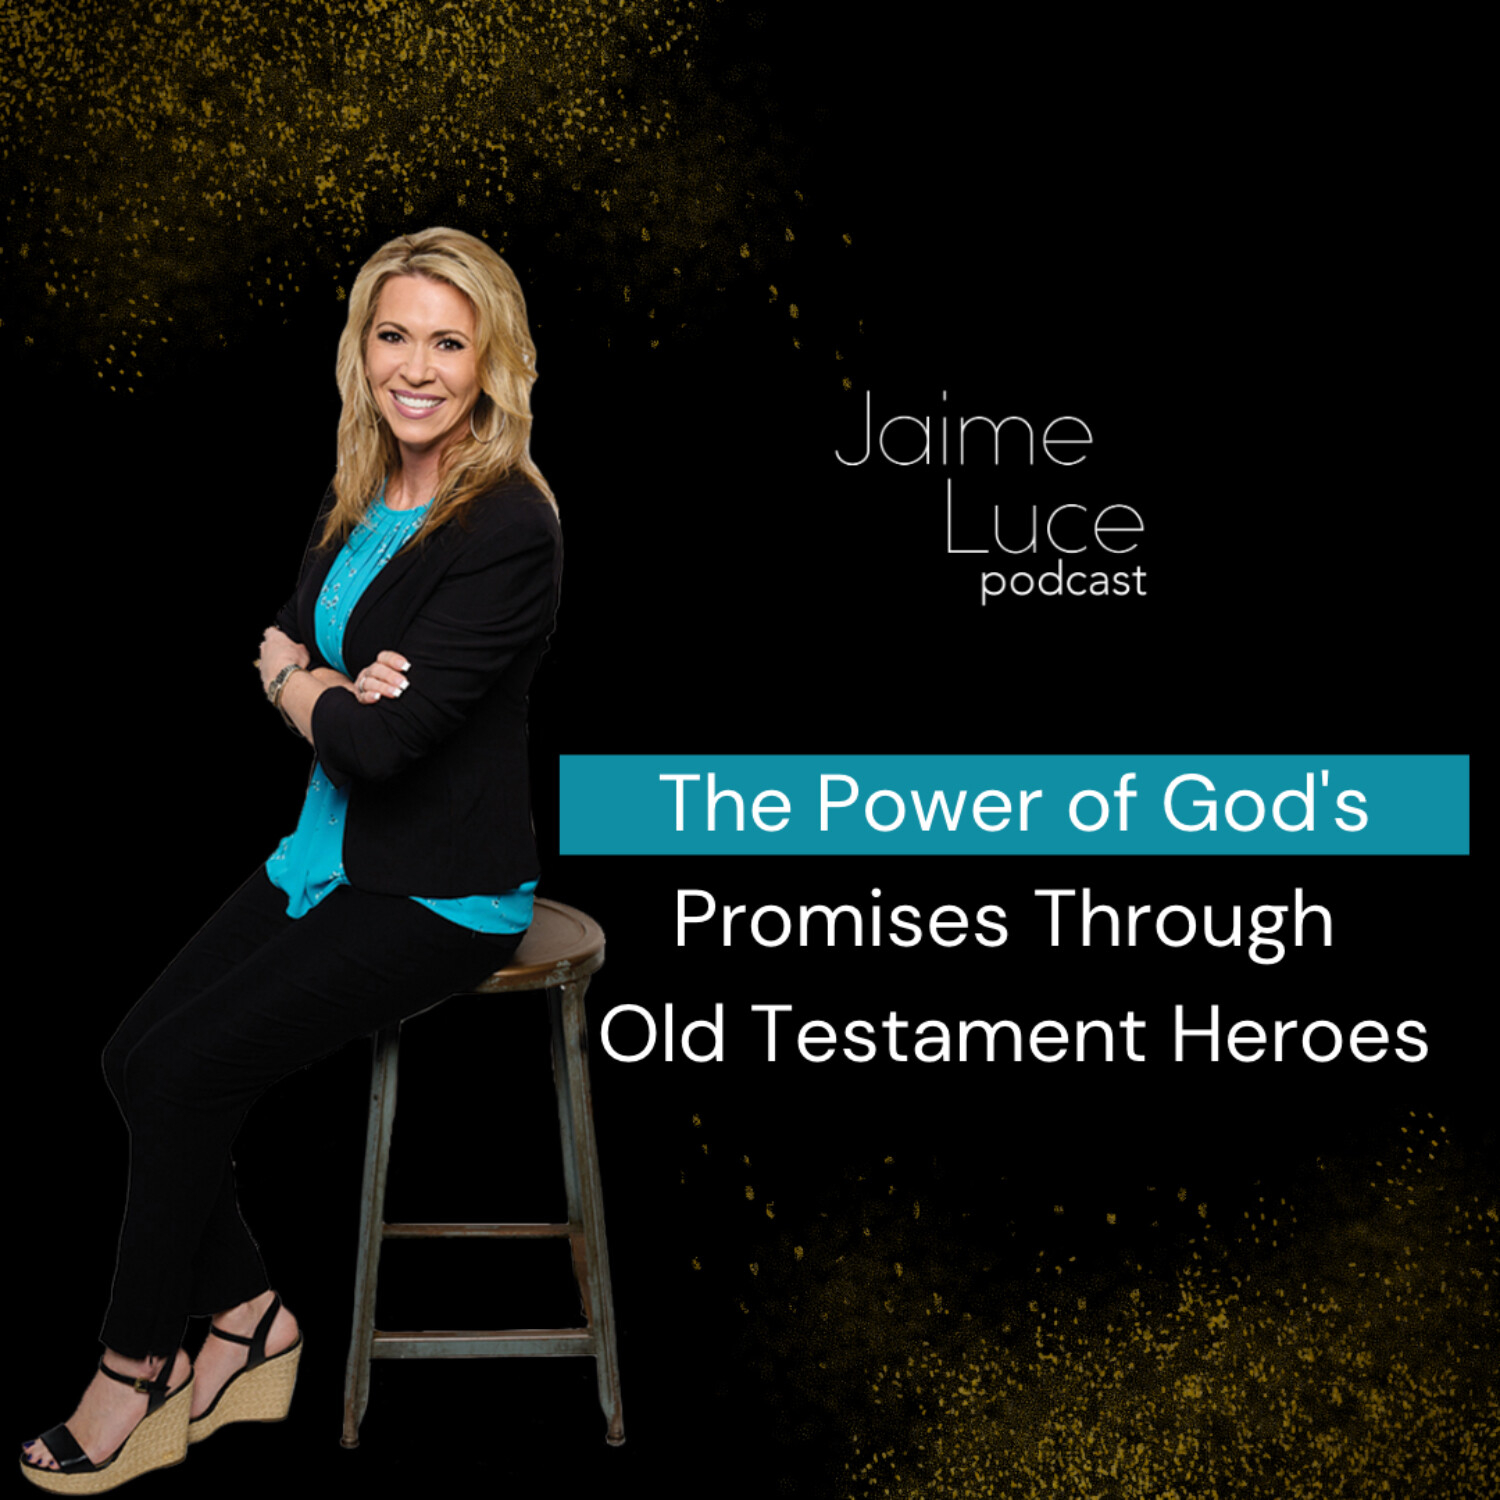 The Power of God's Promises Through Old Testament Heroes